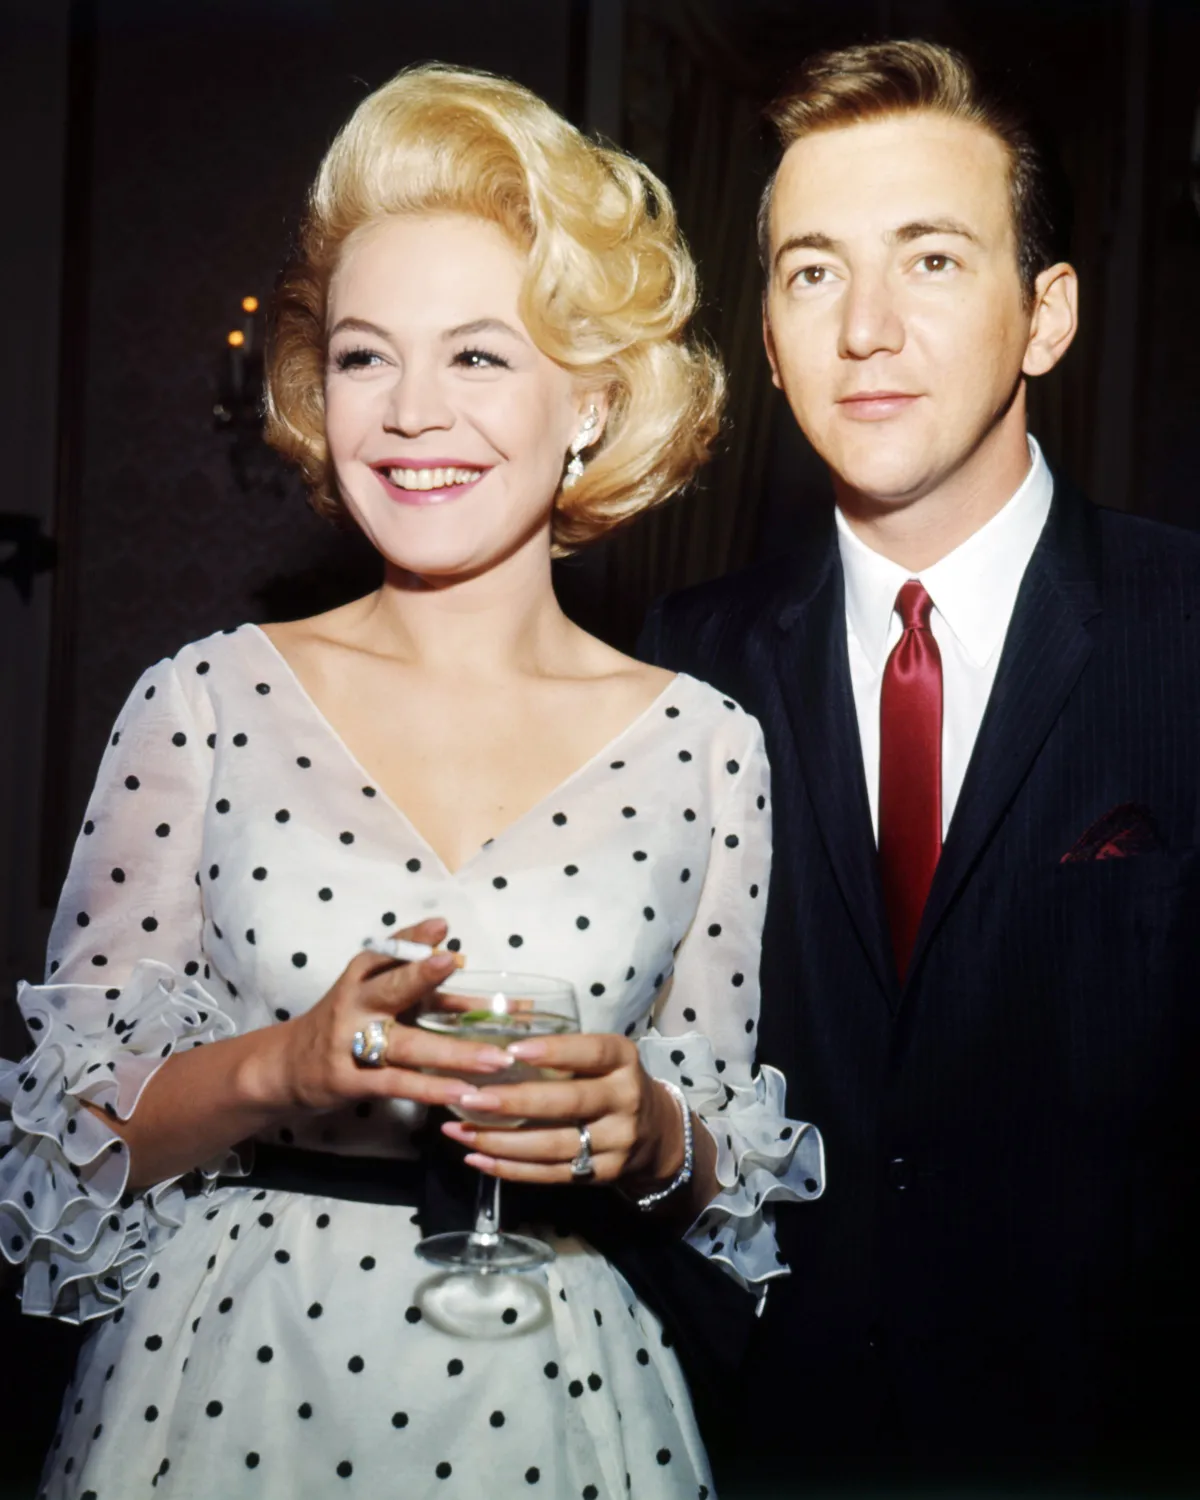 American singer Bobby Darin (1936 - 1973) and his wife, actress Sandra Dee (1942 - 2005), circa 1964. | Source: Getty images